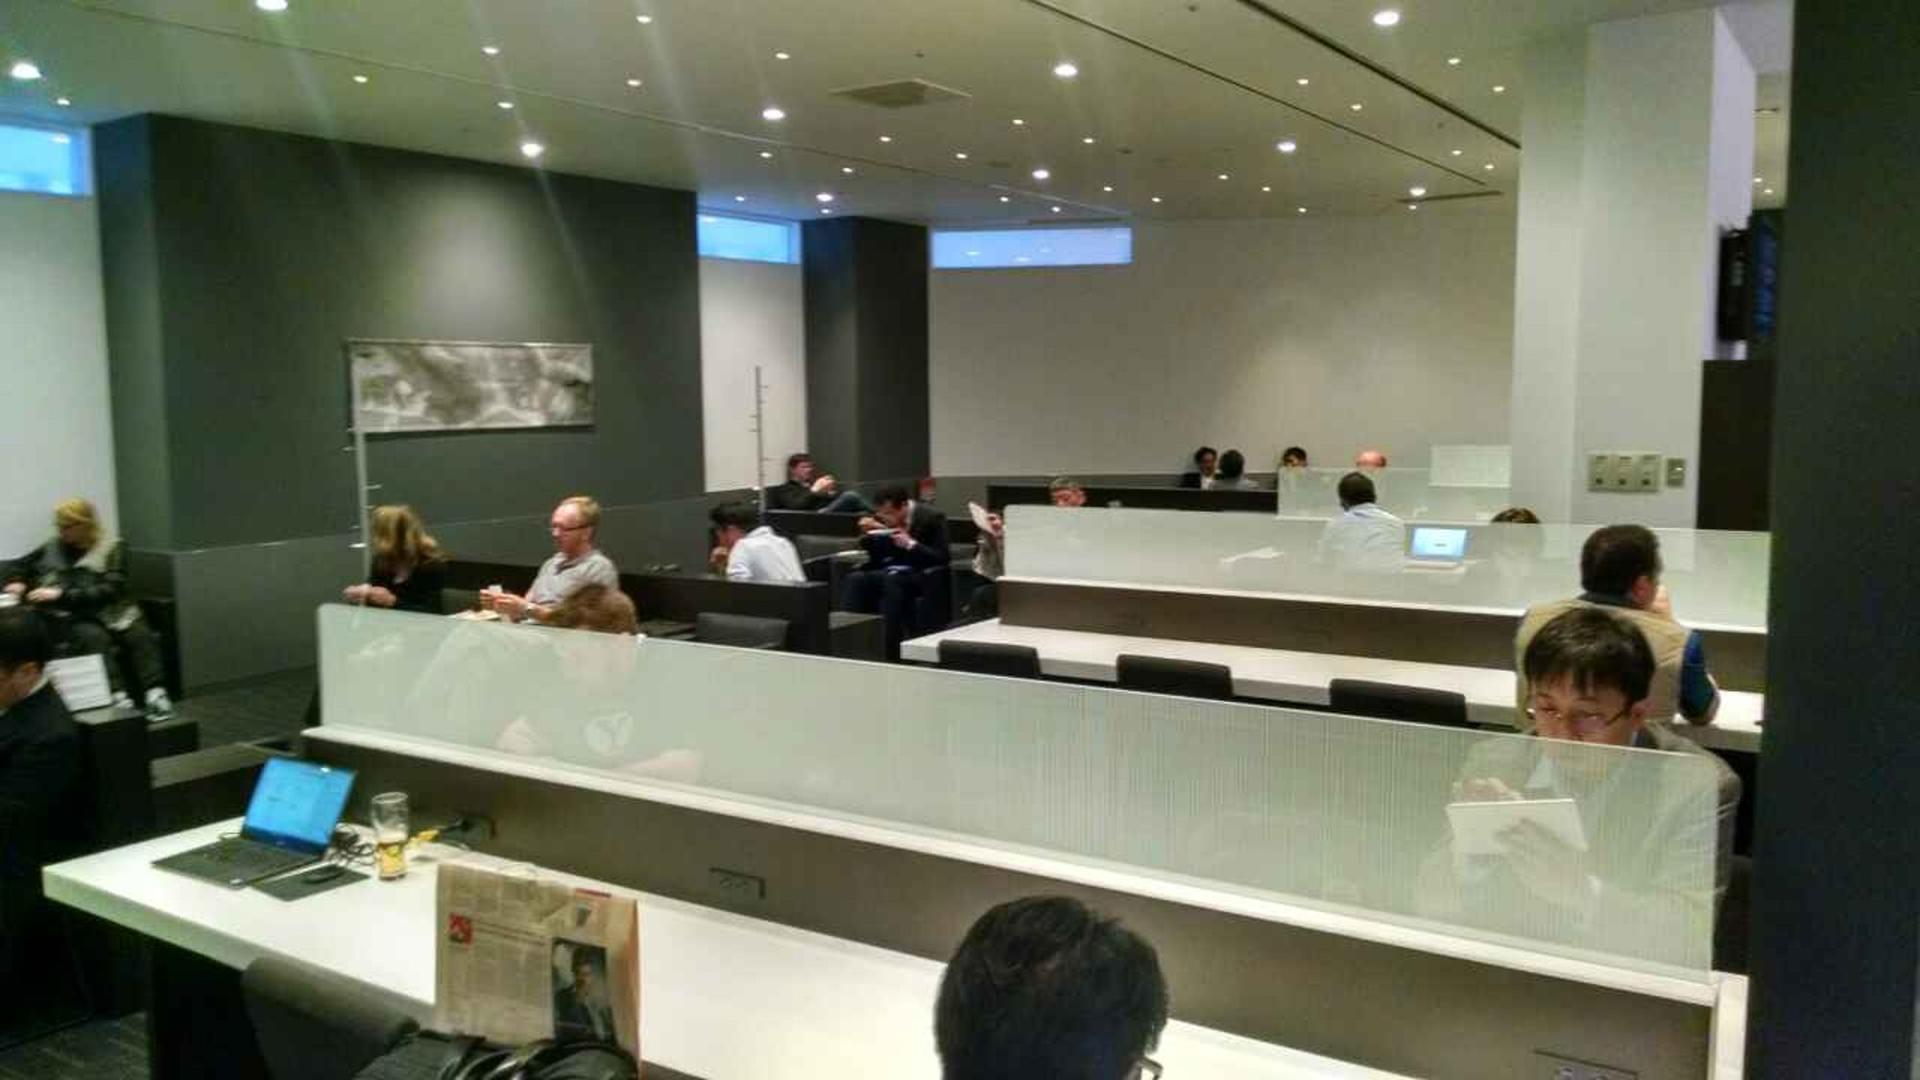 All Nippon Airways ANA Lounge image 21 of 39